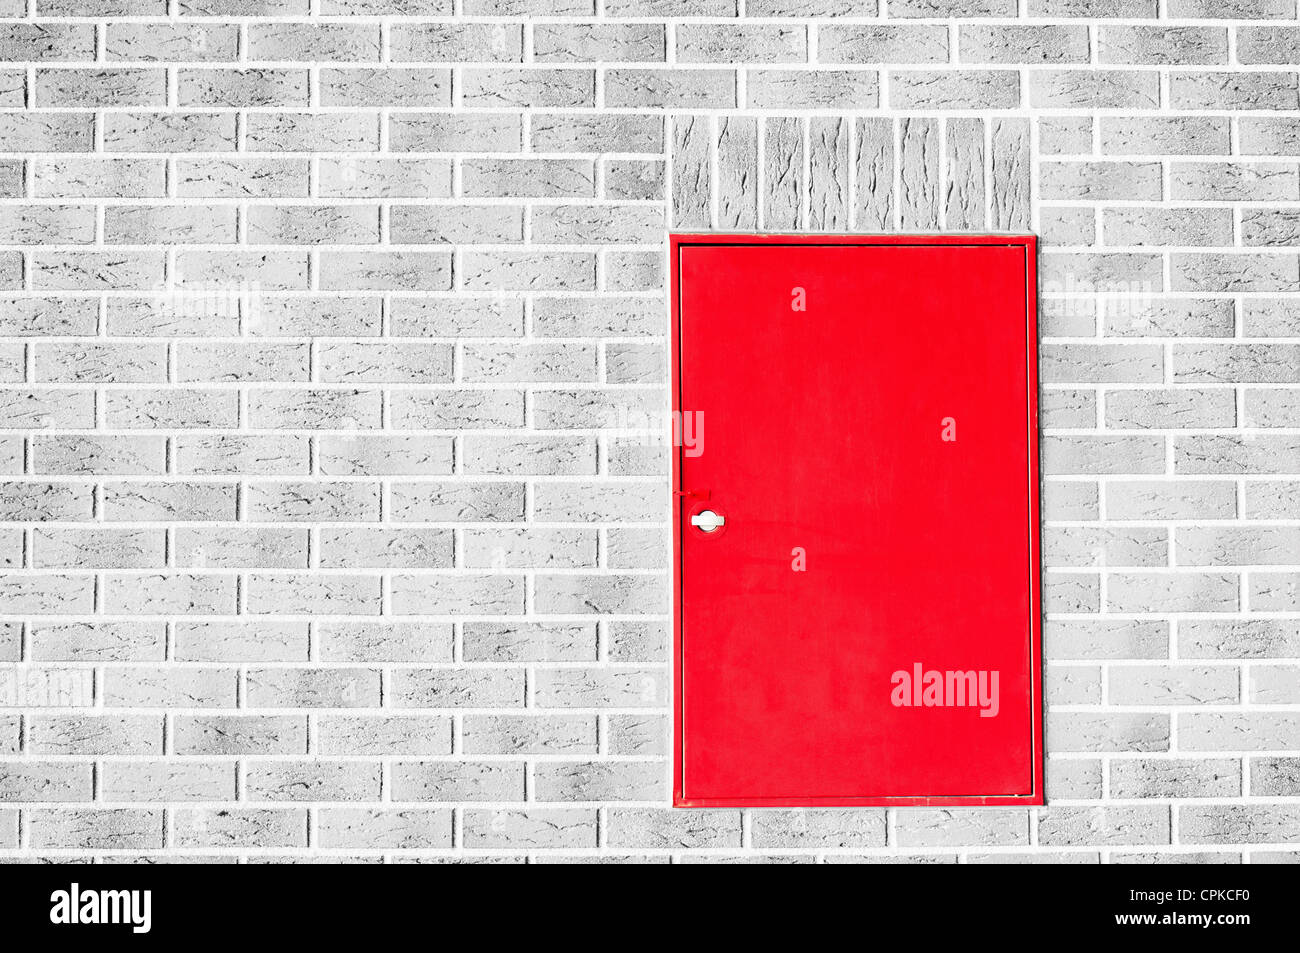 Red fire box in the wall. Stock Photo